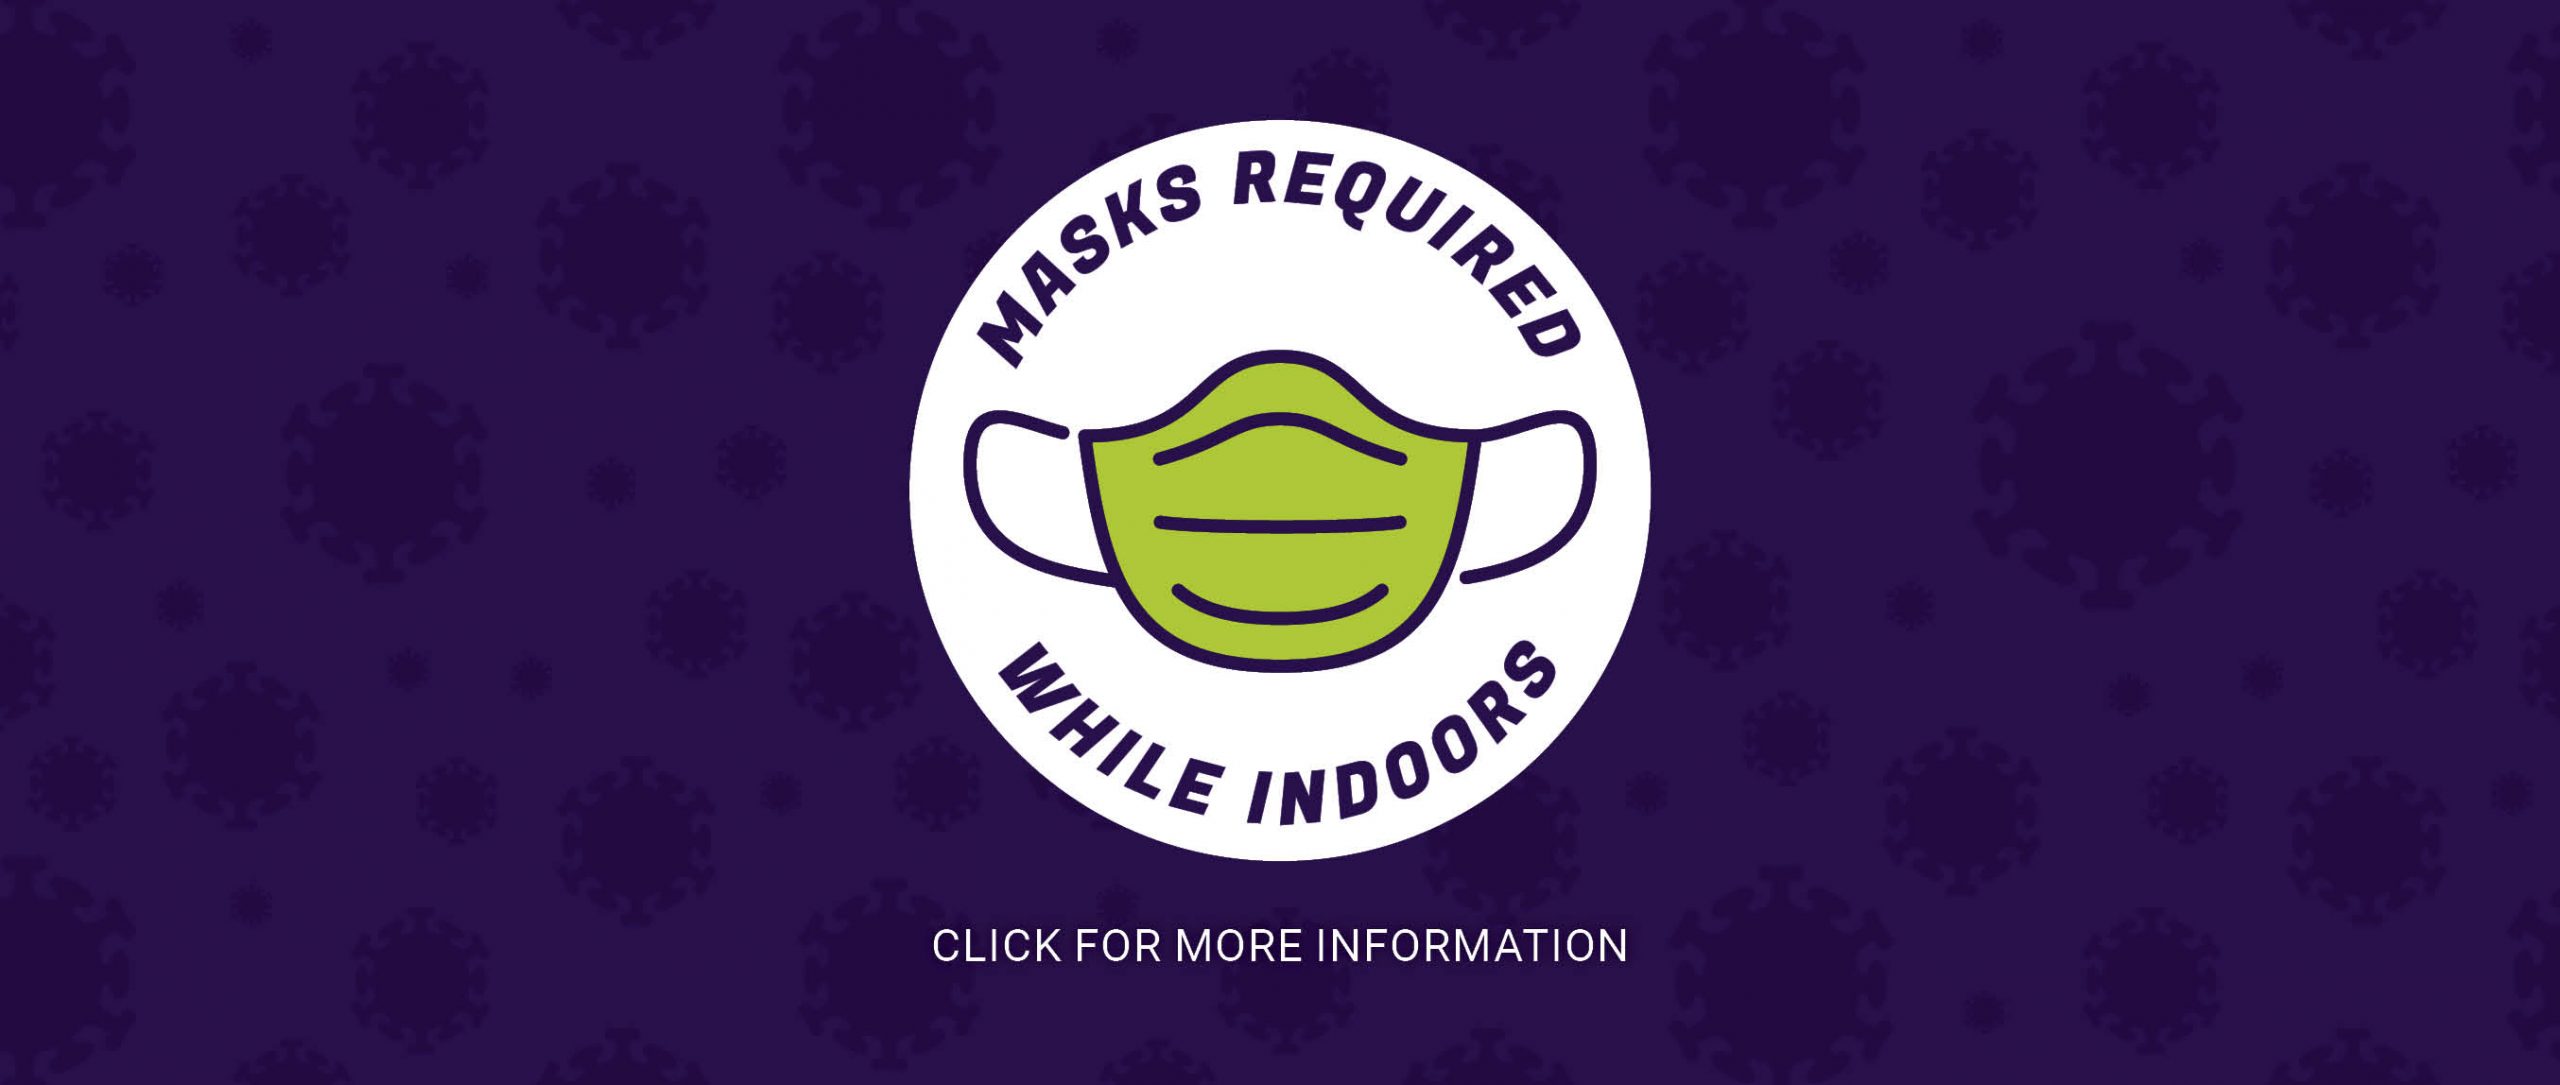 Masks required while indoors, click for more information